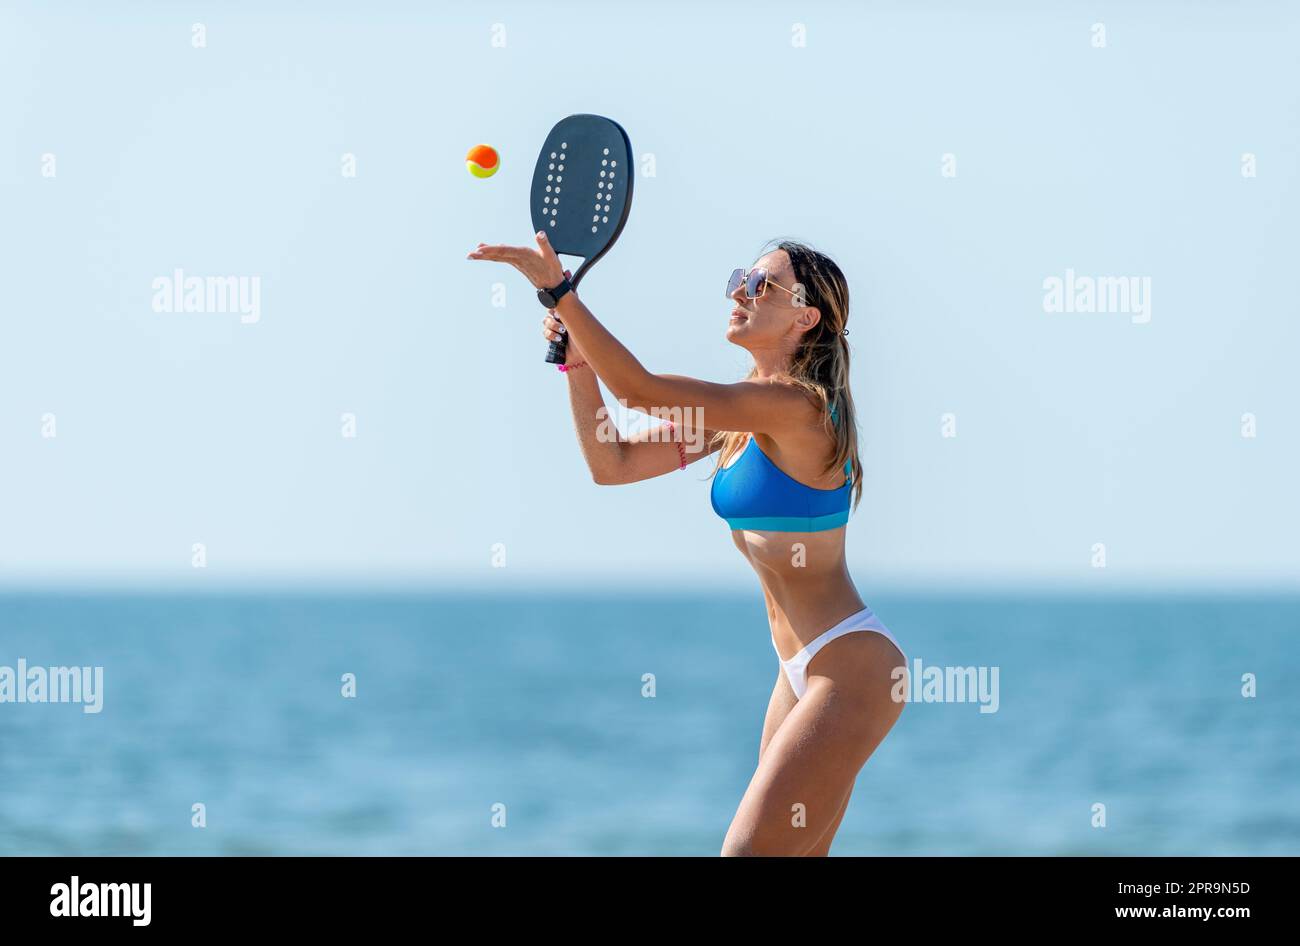 Woman playing beach tennis on a beach. Professional sport concept.  Horizontal sport theme poster, greeting cards, headers, website and app  Stock Photo - Alamy